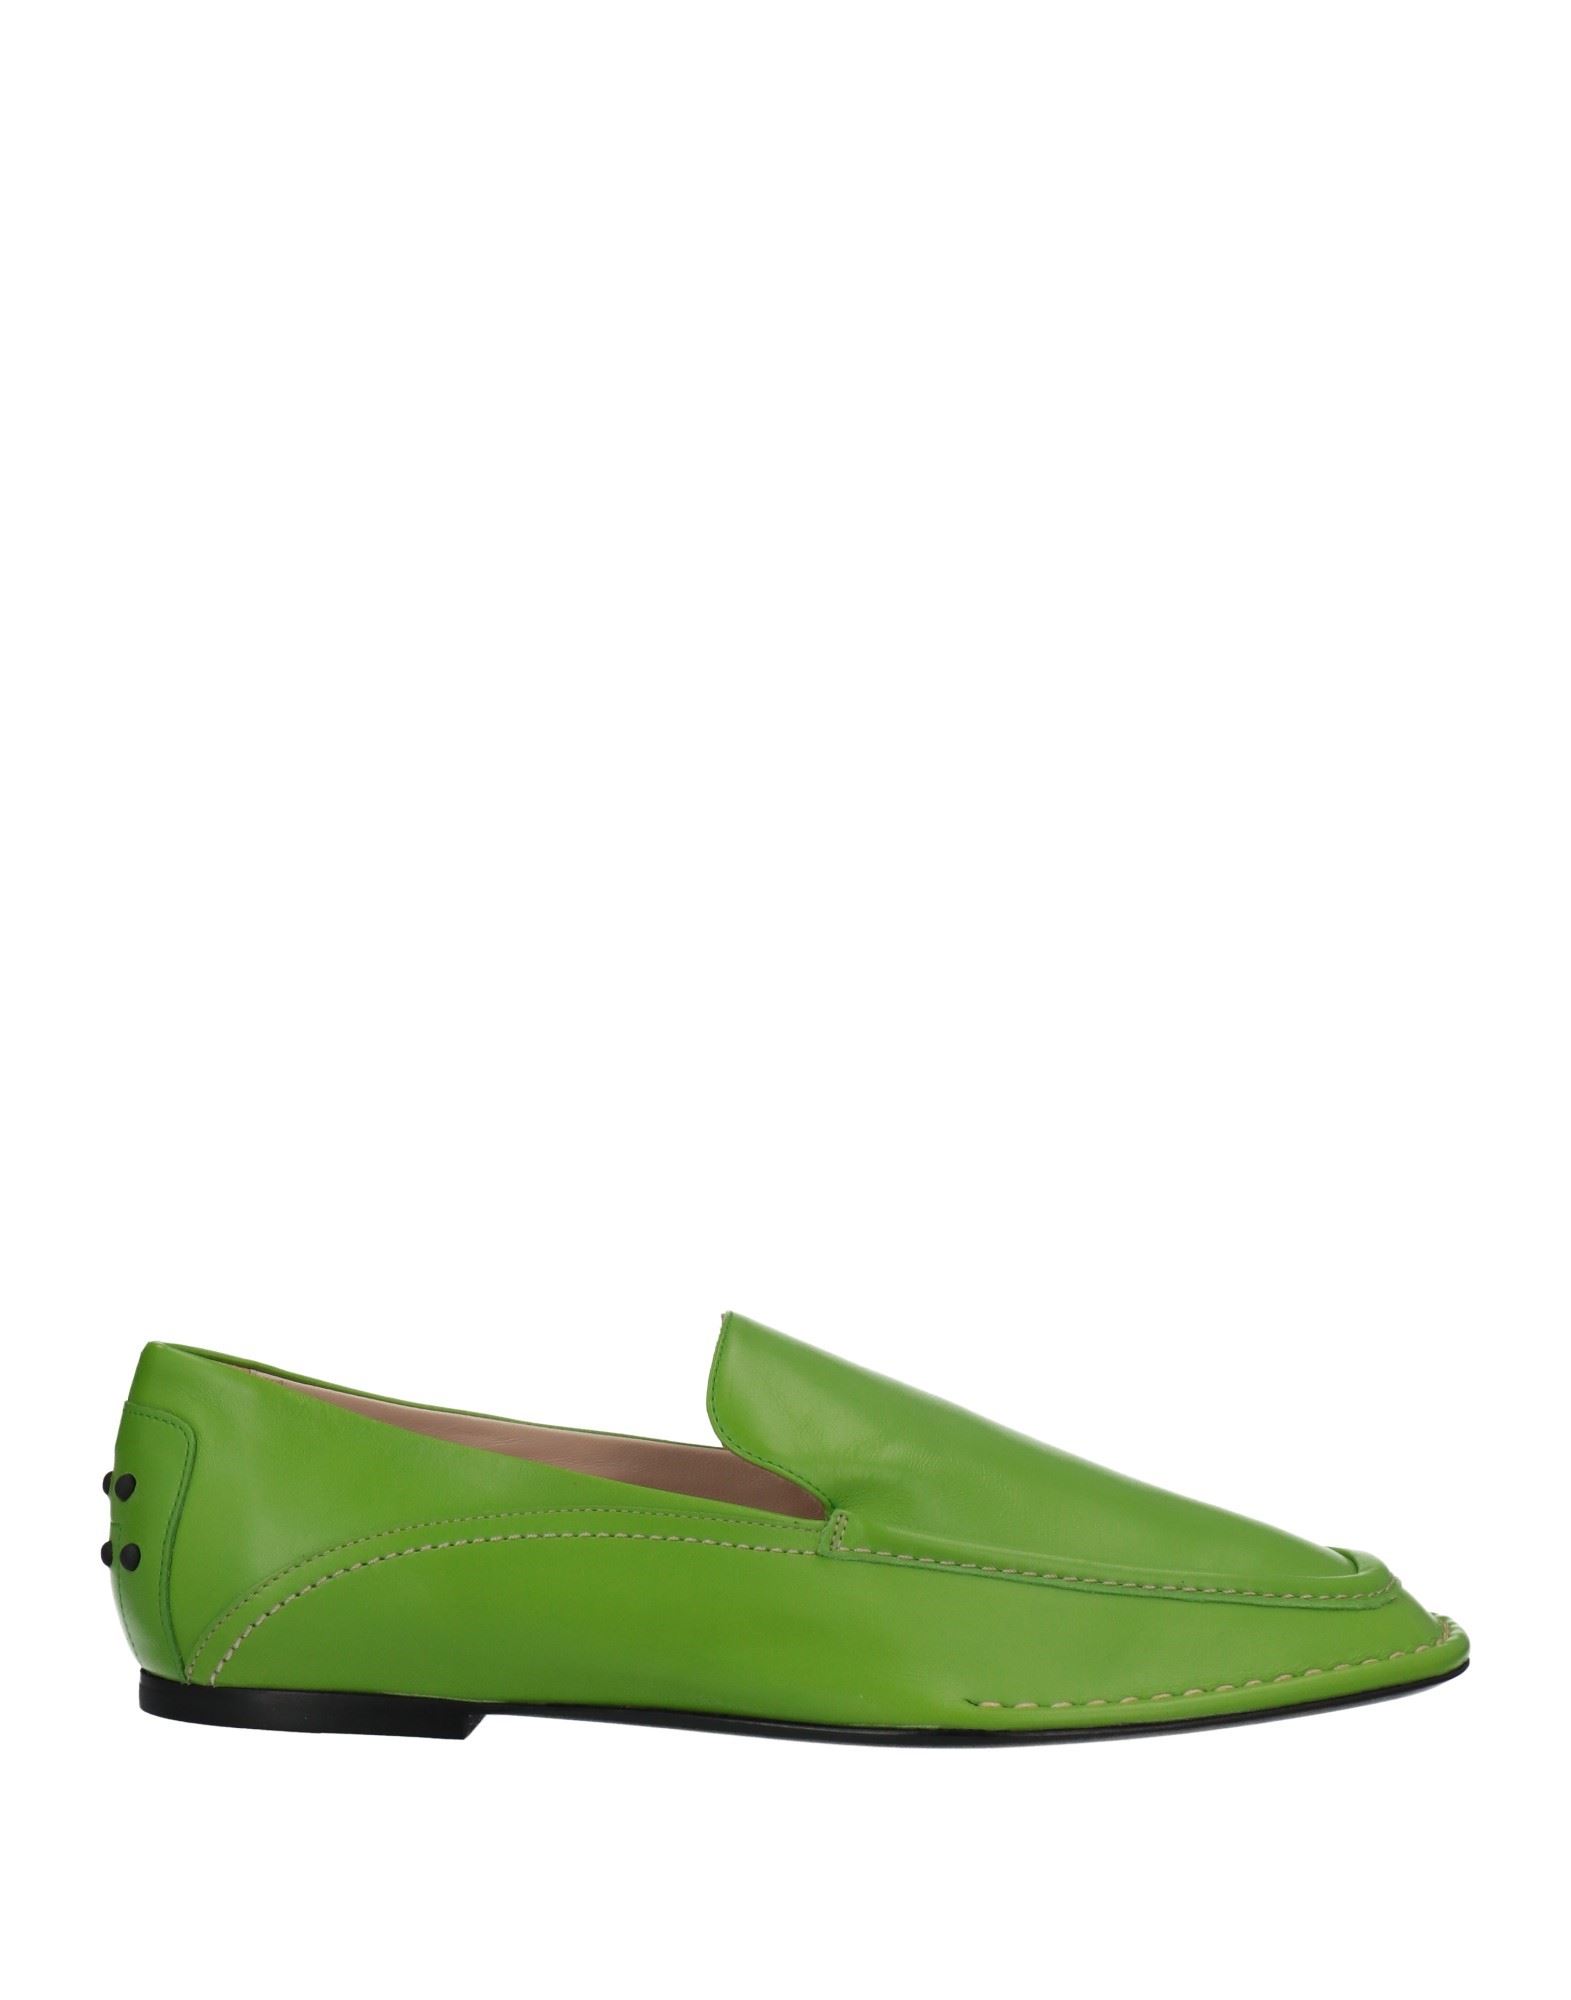 Shop Tod's Woman Loafers Light Green Size 9 Soft Leather